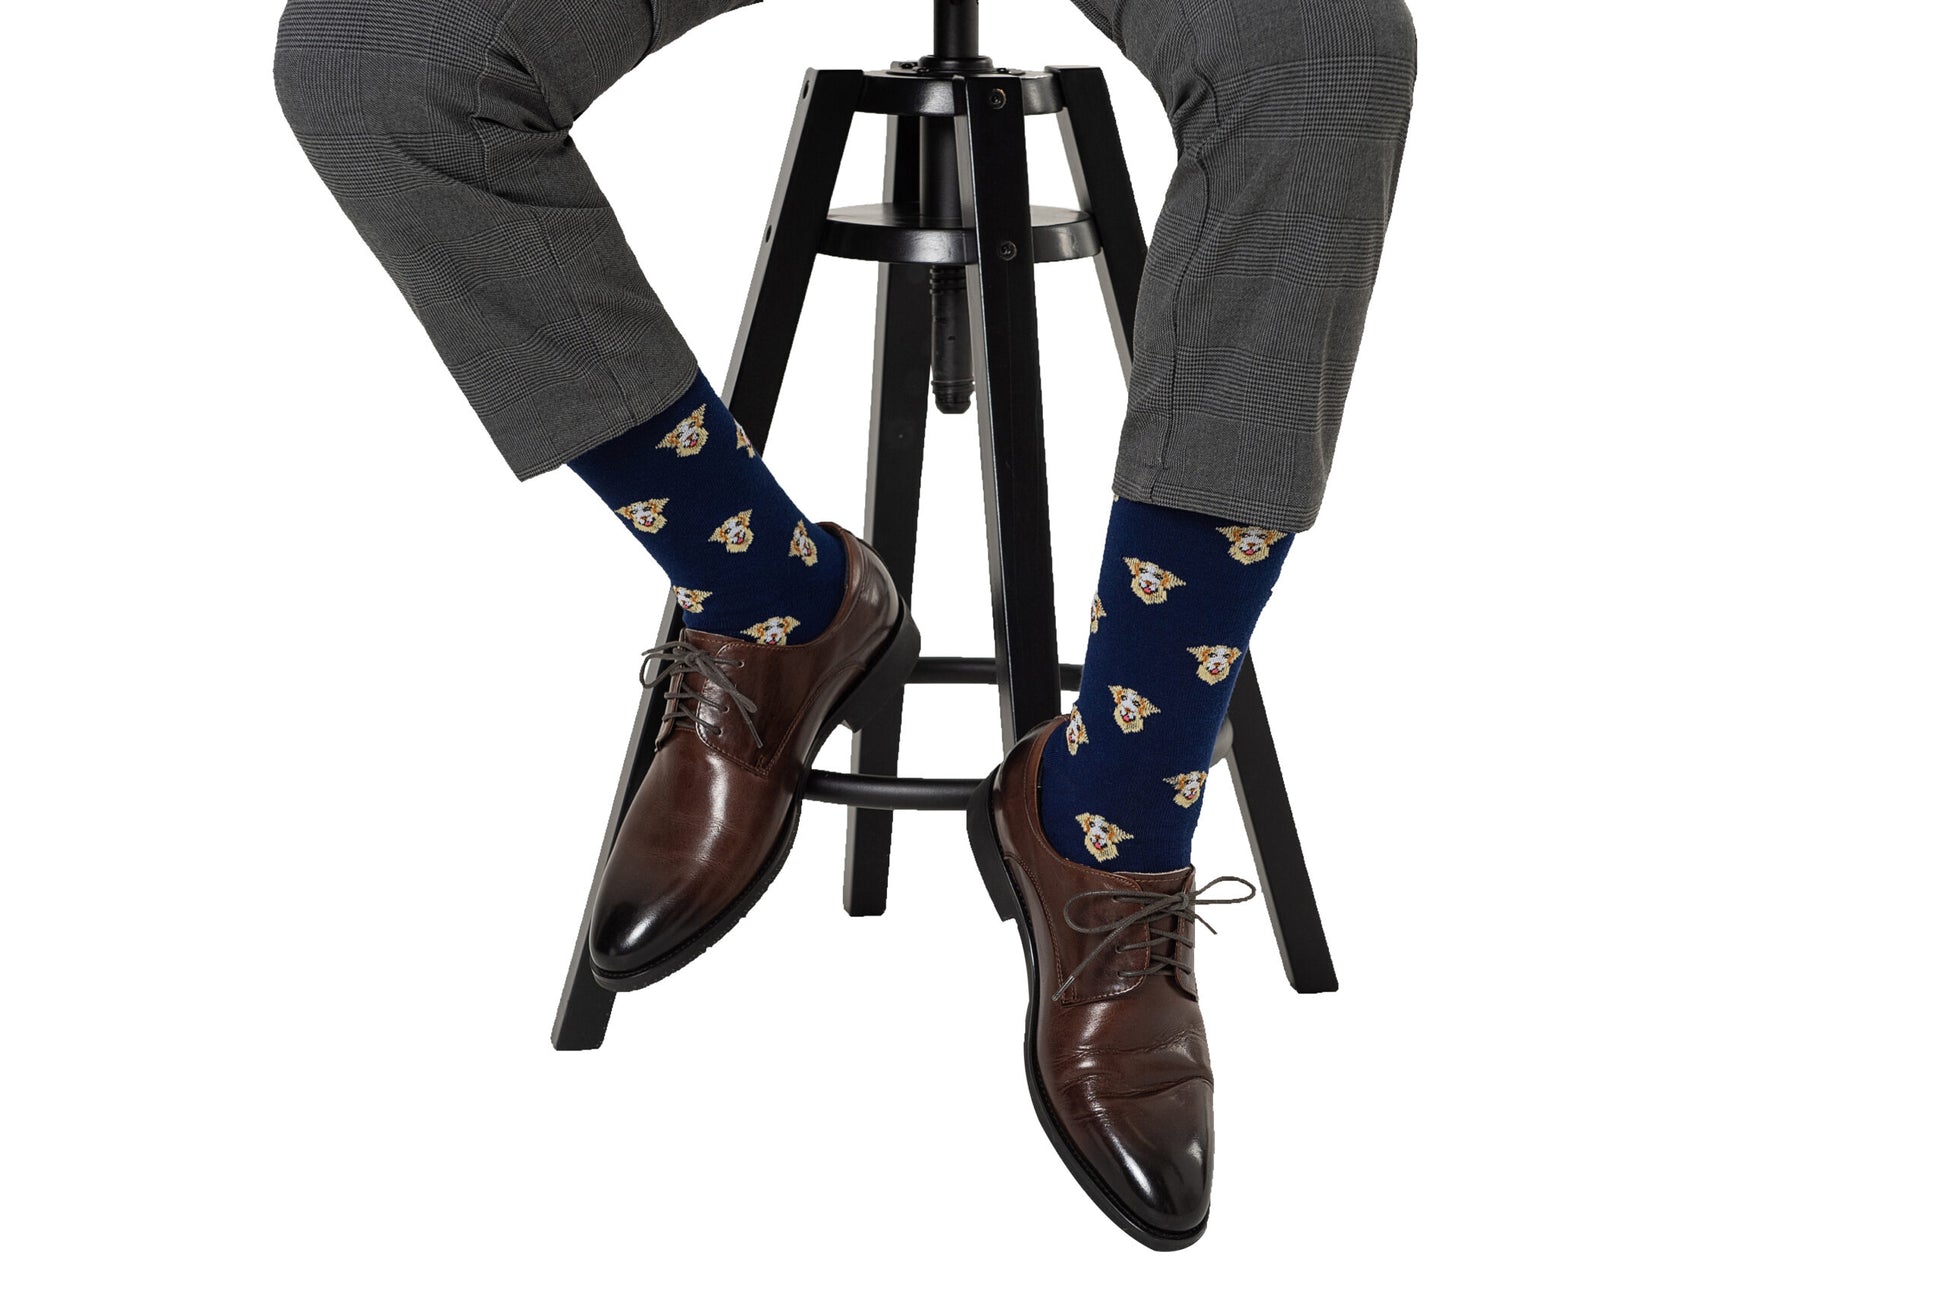 A man sitting on a stool wearing a pair of Labrador Dog Socks.